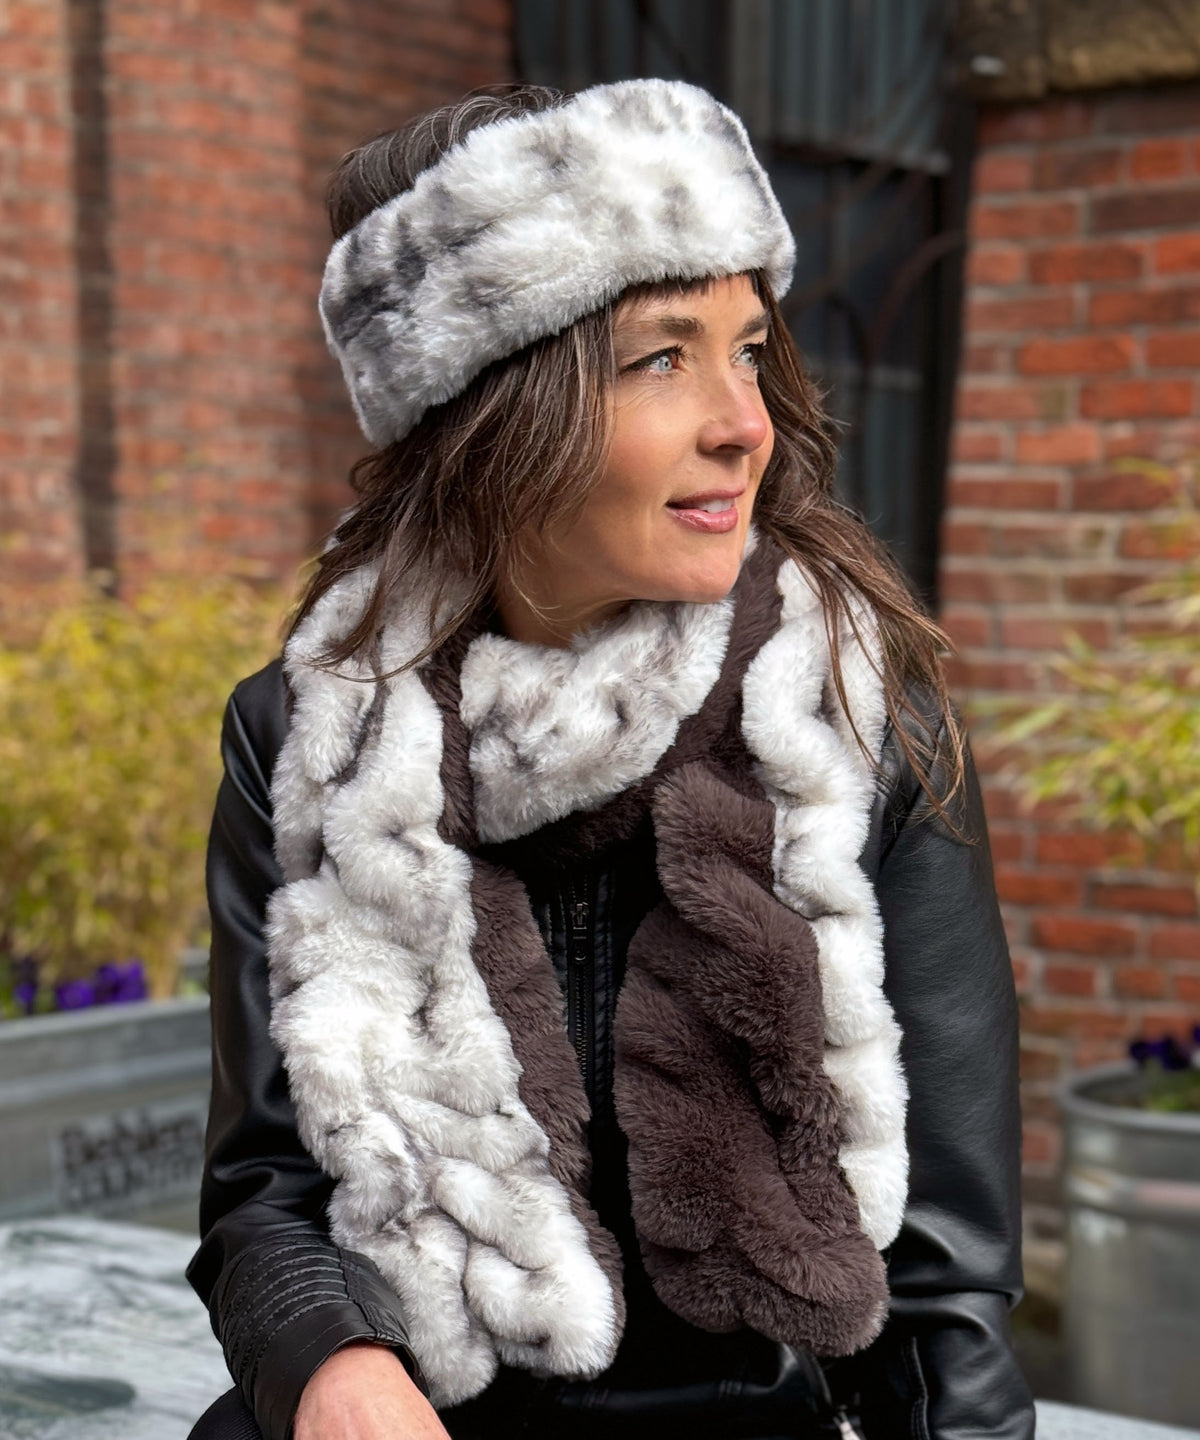 Two-Tone Scarf and Ear Neck Cozy Narrow on model | Aspen and Mink Gray  Royal Opulence Faux Fur | Handmade USA Pandemonium Seattle